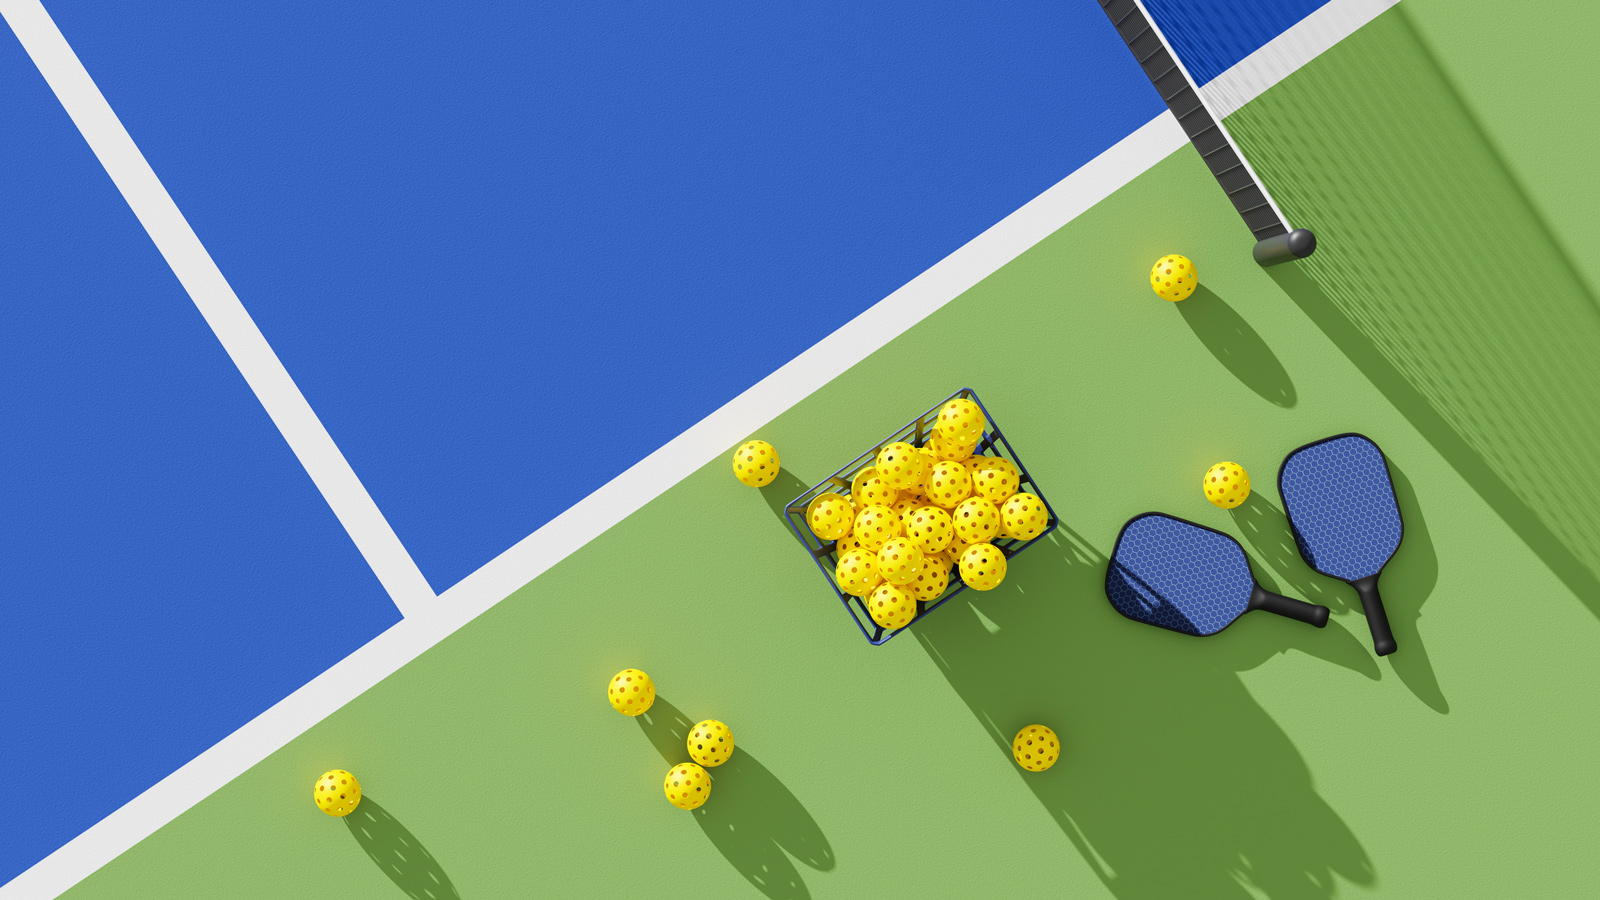 Two Pickleball paddles and basket of balls on court. Top view. 3d illustration, render.